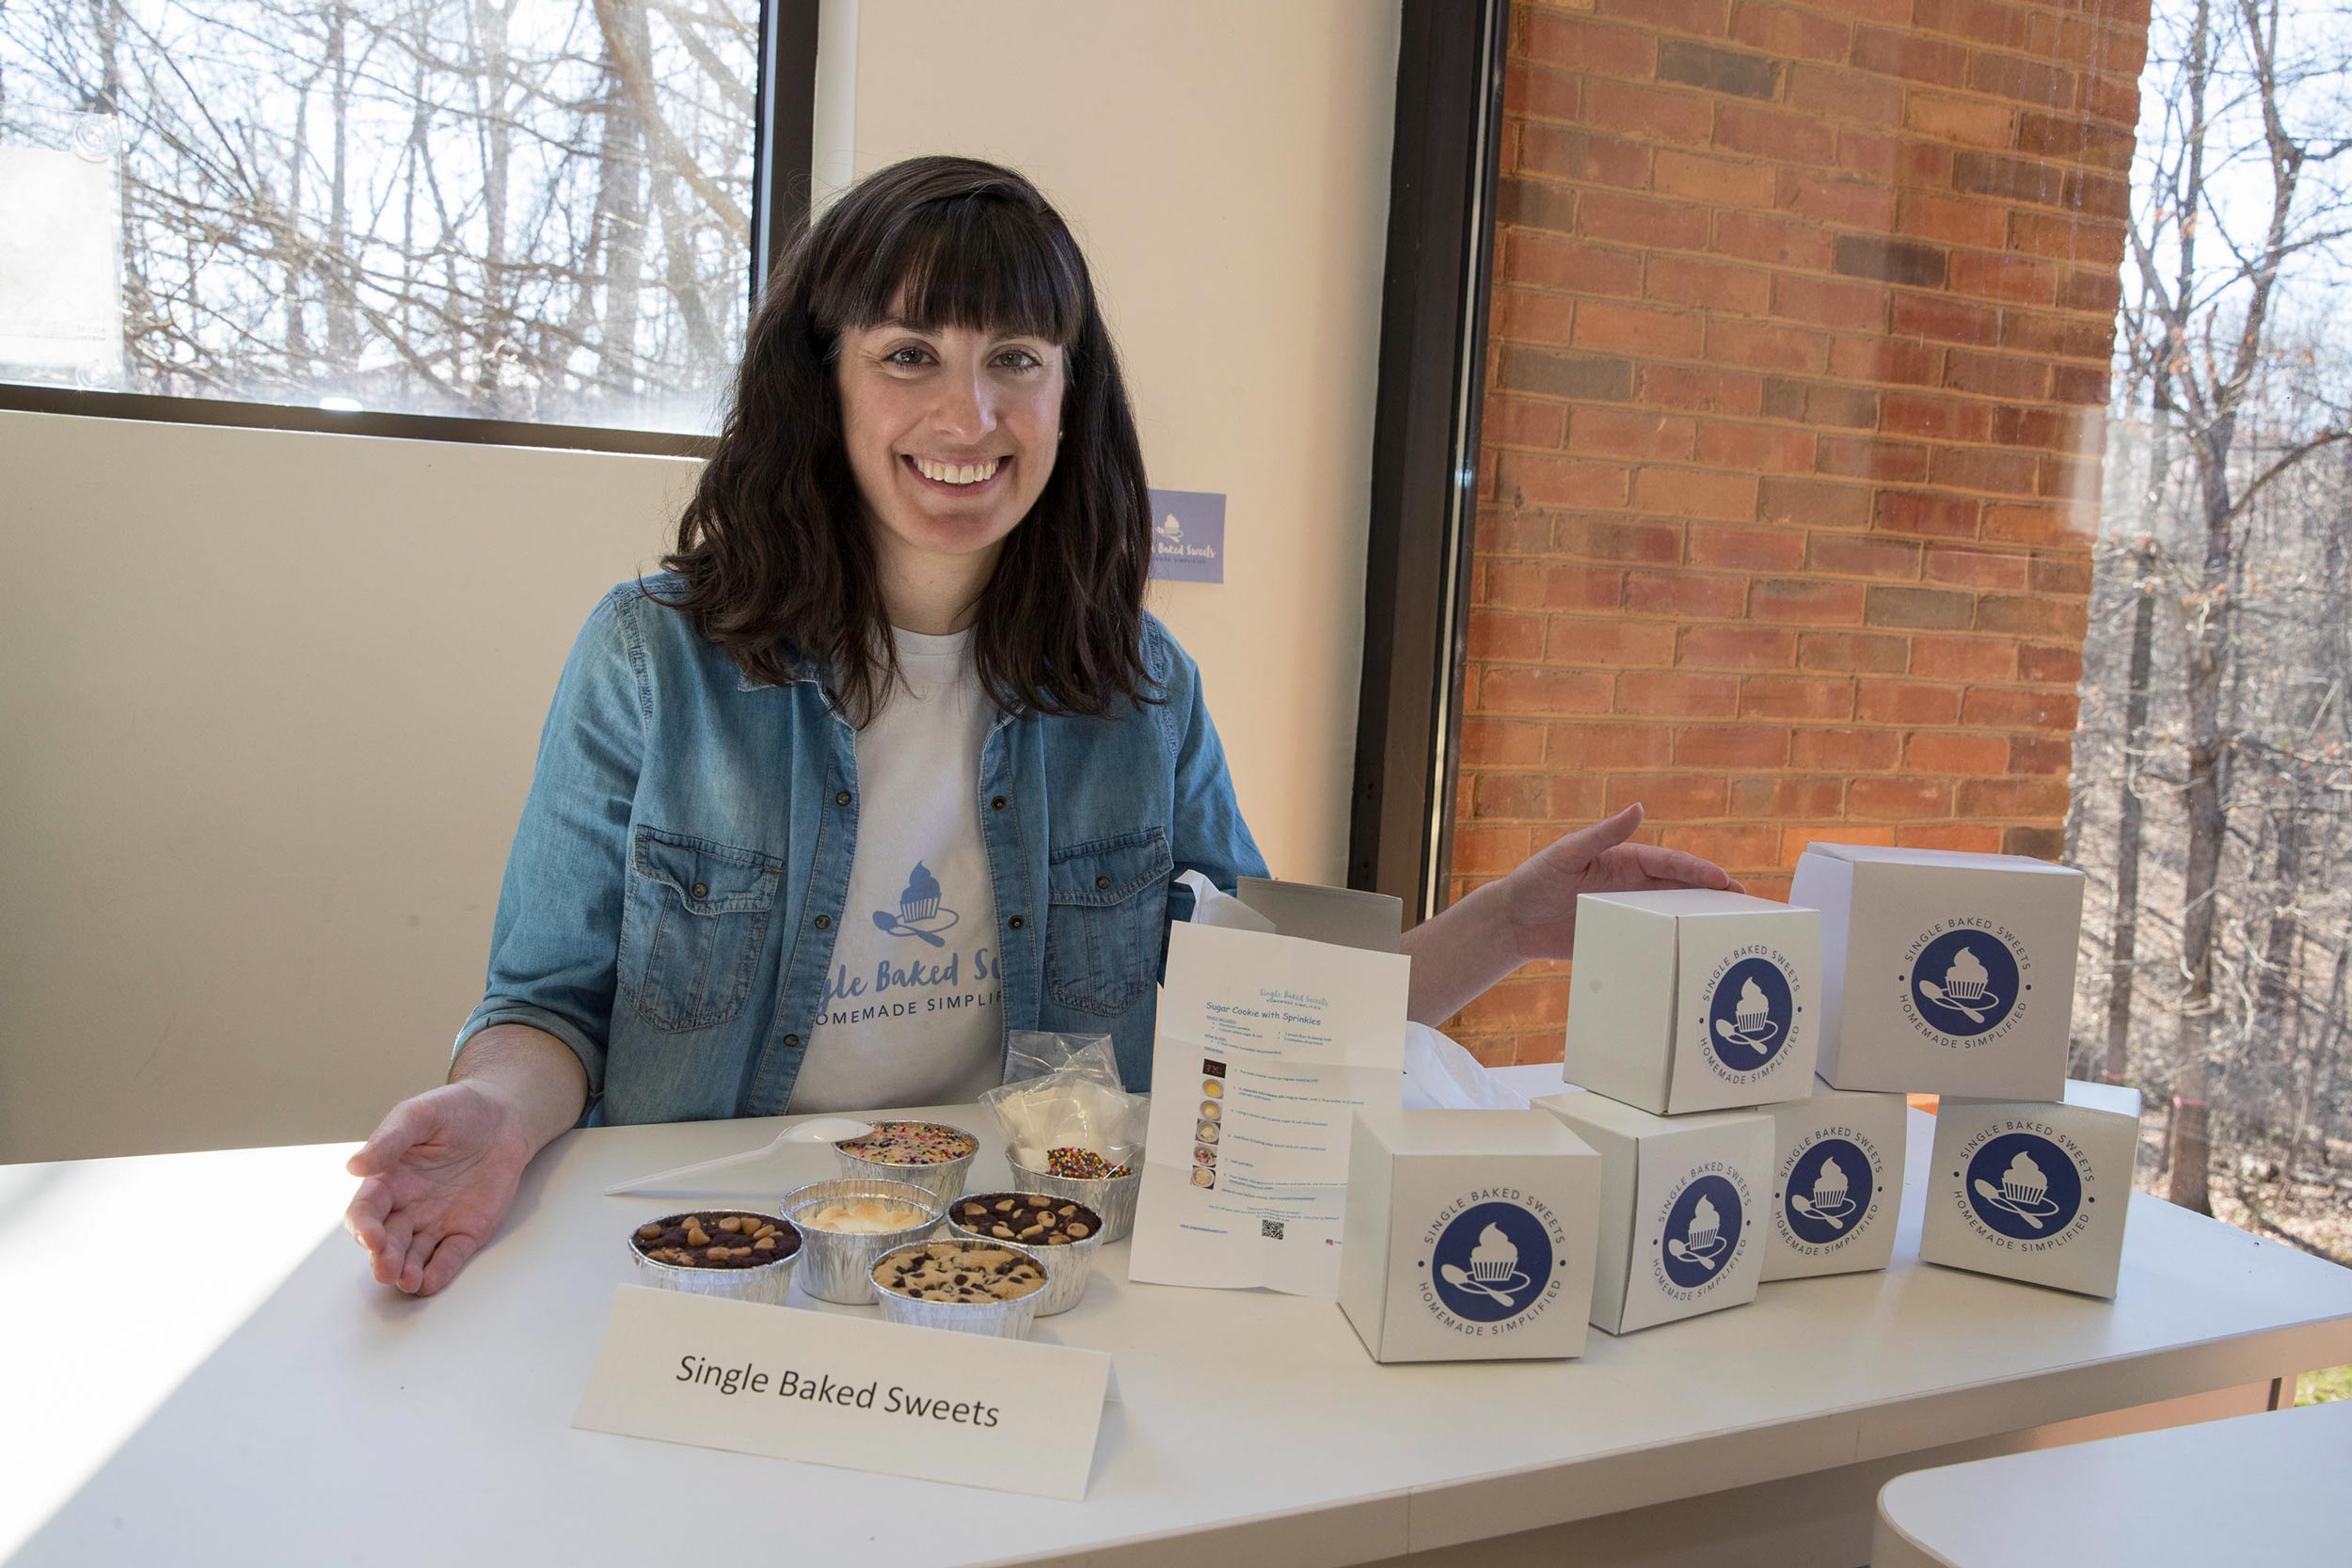 Melissa Stefaniak sits at a table with boxes and single baked sweets